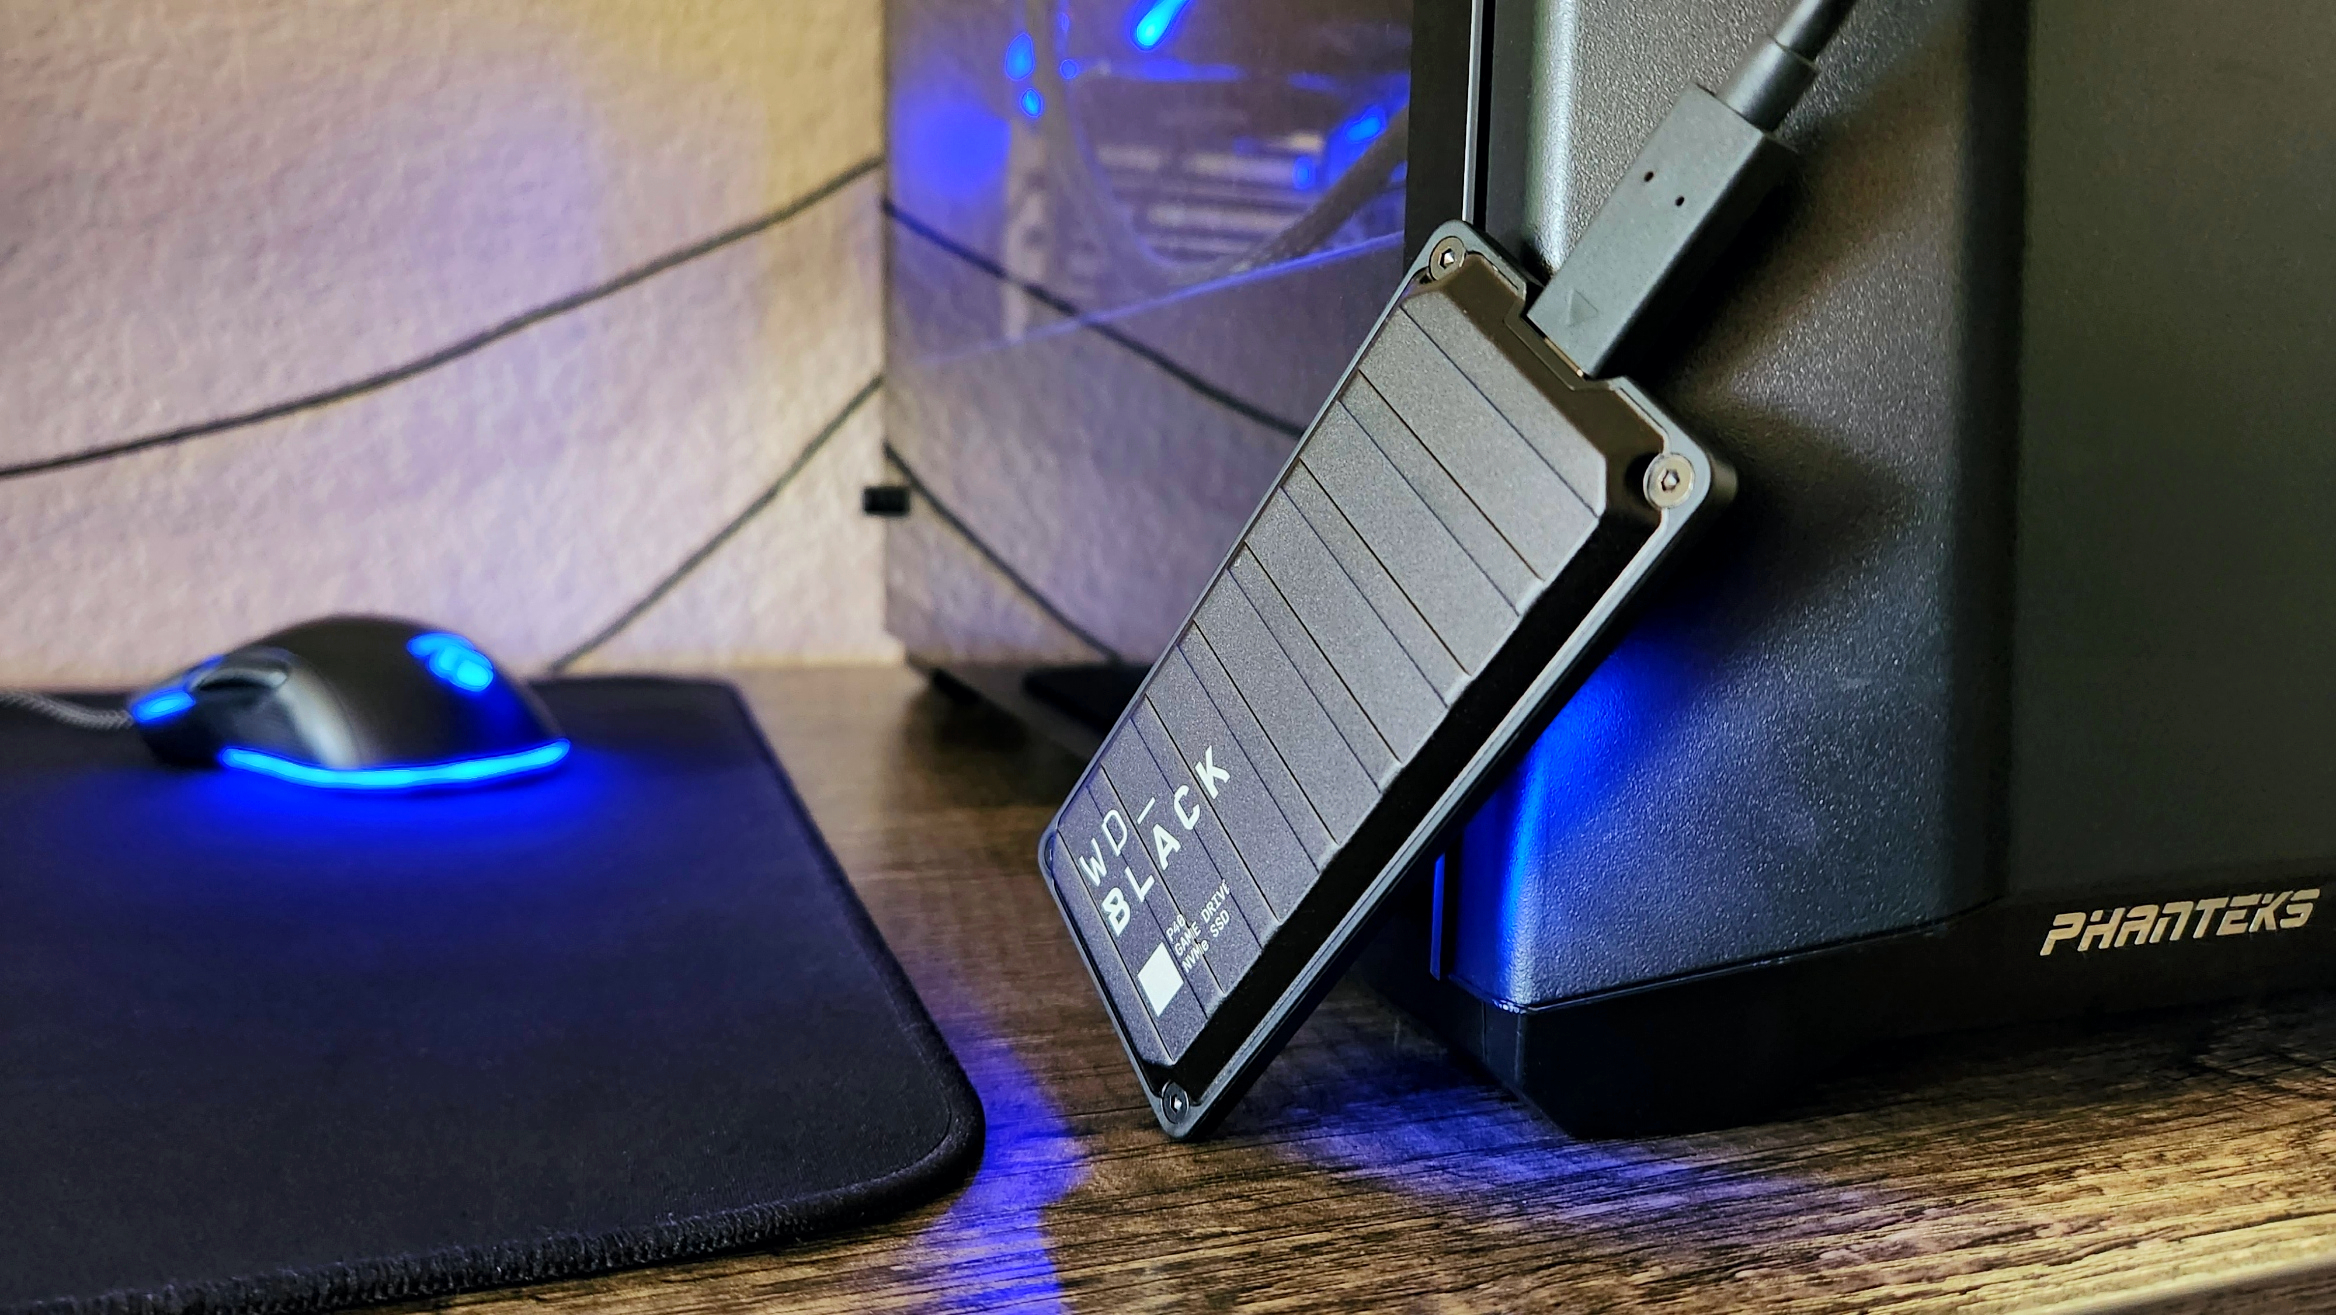 WD Black P40 Review: How does it compare to P50 and D30?